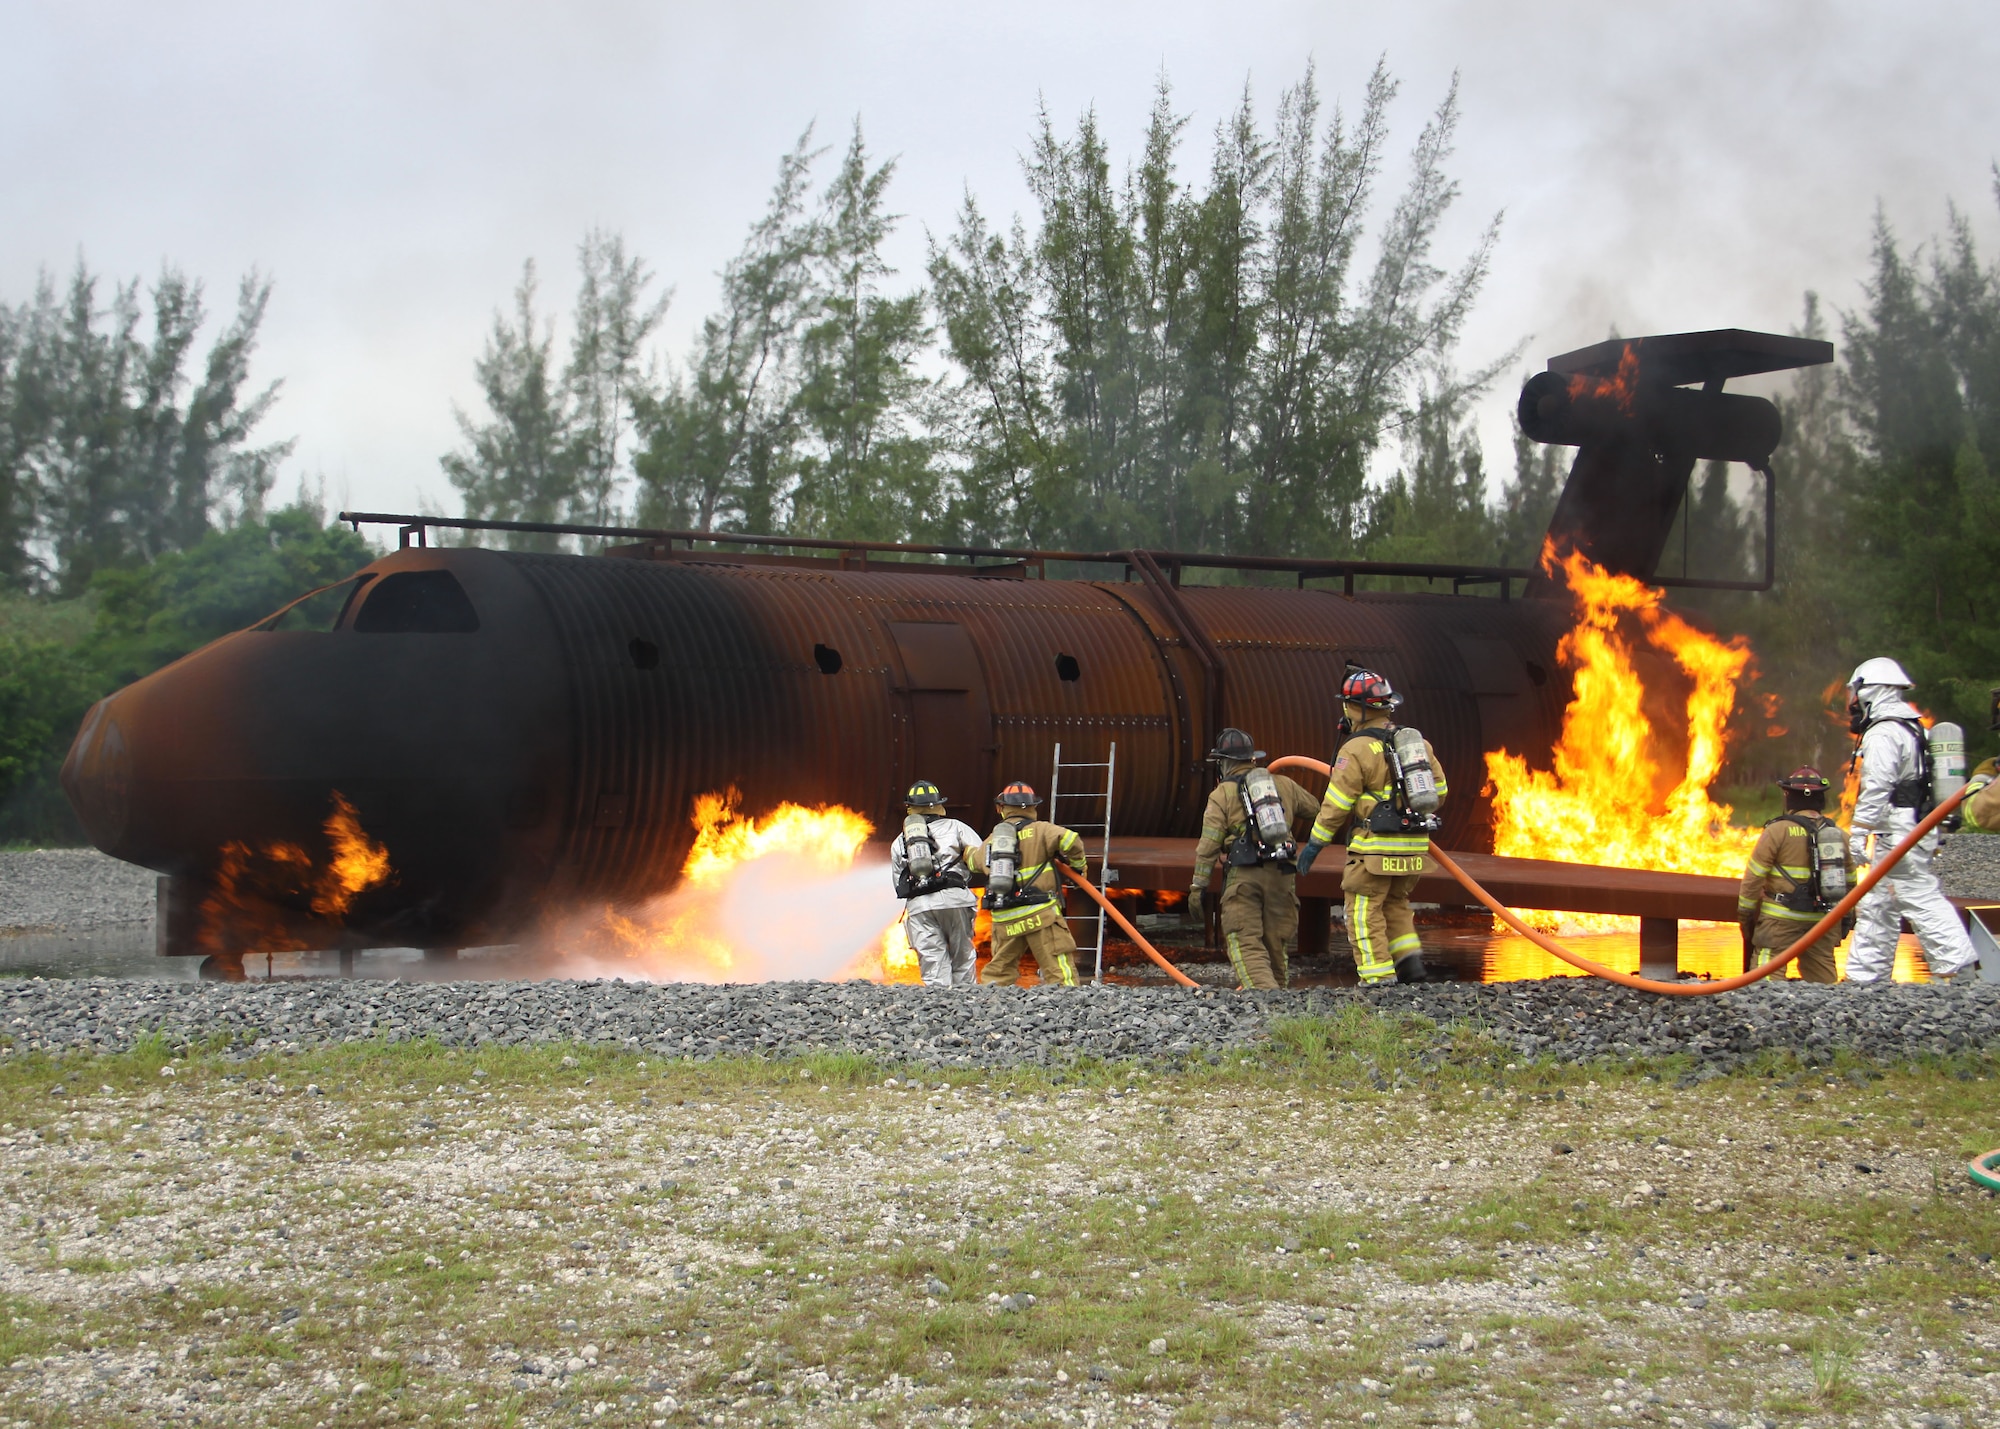 Miami-Dade Fire Rescue and Homestead Air Reserve base firefighters extinguish a mock aircraft fire at the Aircraft Fire Training Facility at Homestead ARB, June 29. The event, part of a two-week series of training, was conducted at the Aircraft Fire Training Facility here on base. The facility simulates a realistic aircraft and can be used for a number of scenarios including liquid fire, cabin fire and engine fire. By conducting the training at Homestead, M.D.F.R. saved a quarter of a million dollars, as opposed to traveling to Dallas, where they had gone in the past. (USAF photo/Mr. Ian Carrier)